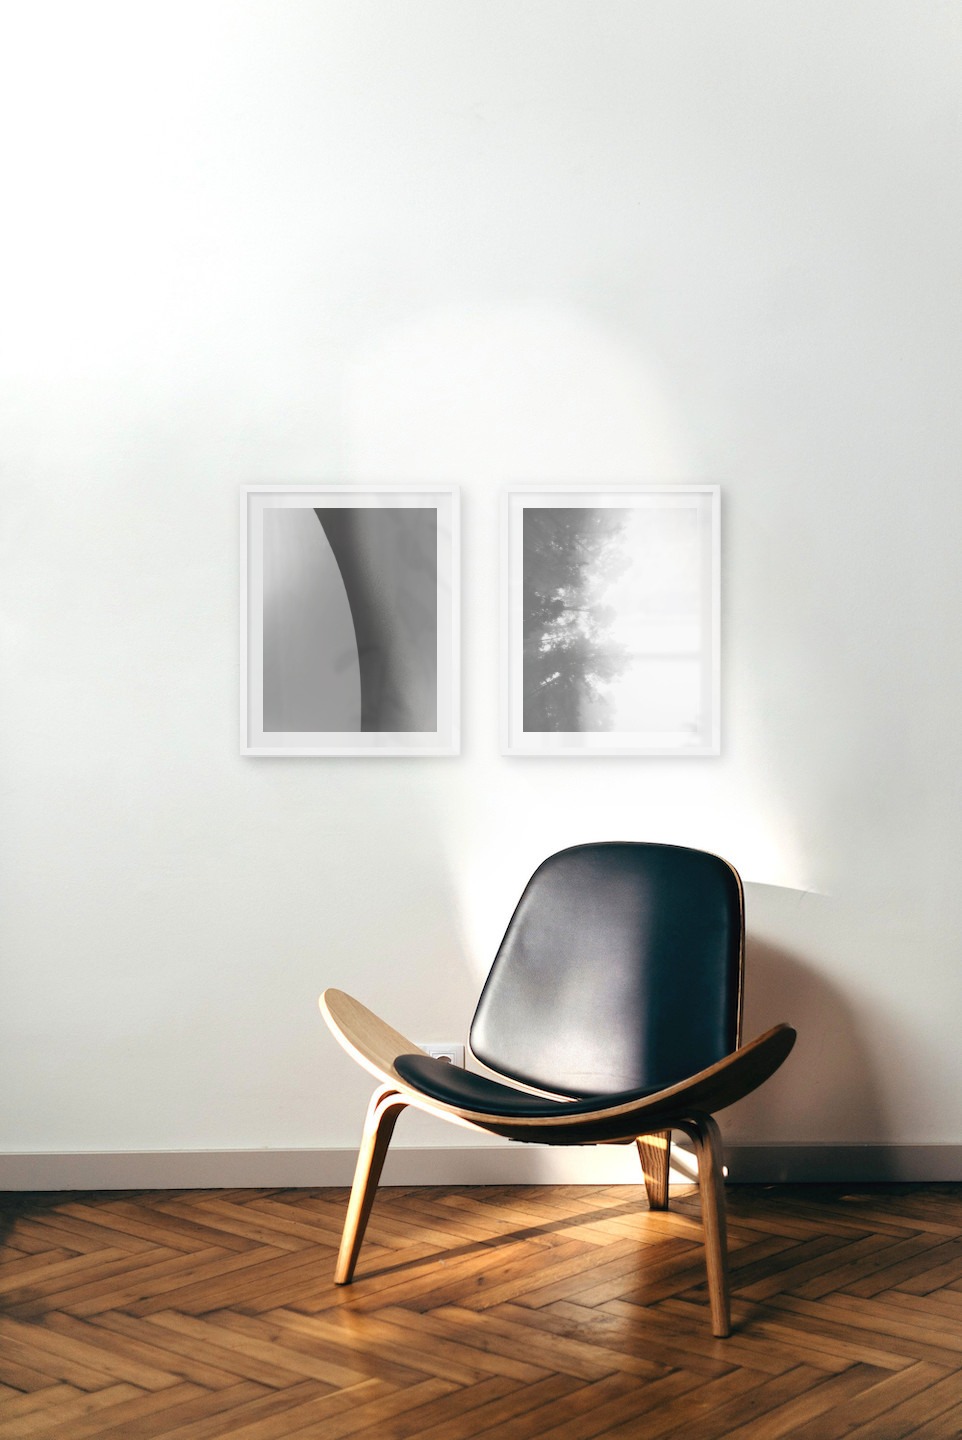 Gallery wall with picture frames in white in sizes 40x50 with prints "Line" and "Foggy wooden tops from the side"